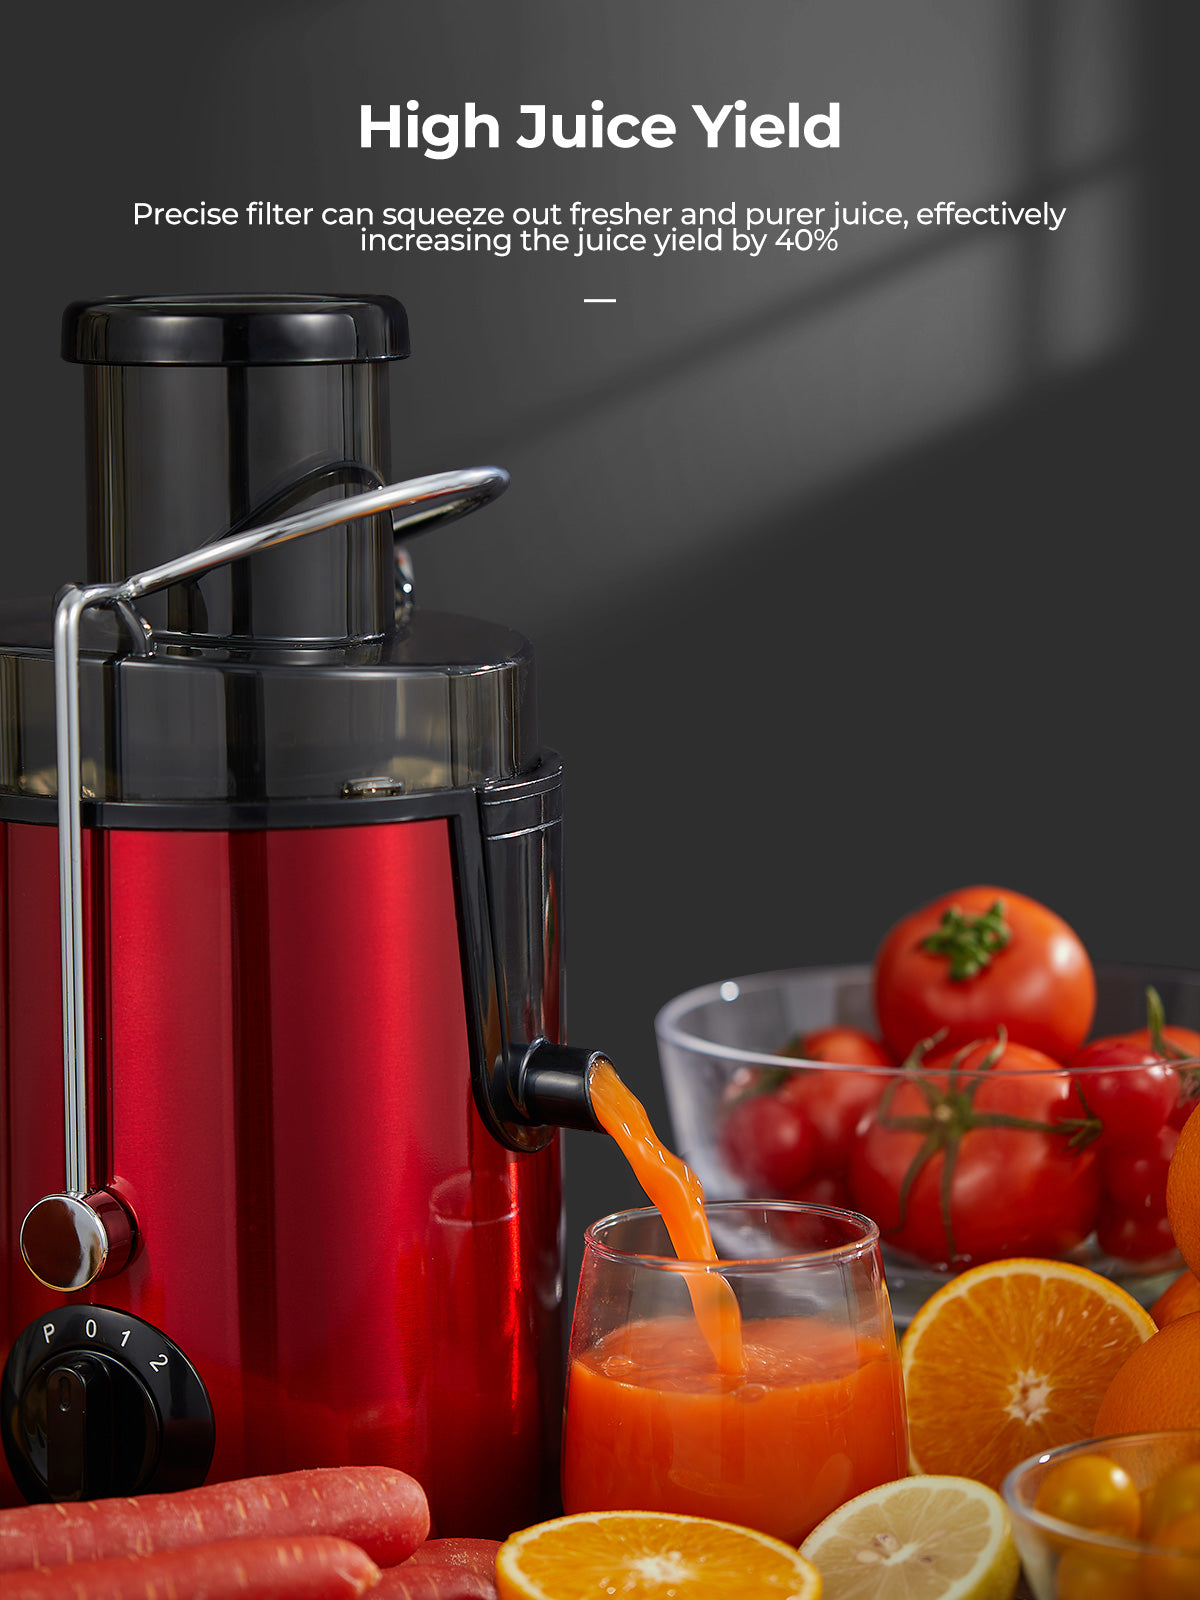 Aiheal Juicer Machines, Centrifugal Juicer Extractor 3 Speeds with 3'' Feed Chute for Whole Fruit and Vegetables, Stainless Steel, Easy to Clean, Cleaning Brush and Recipe Included, RED